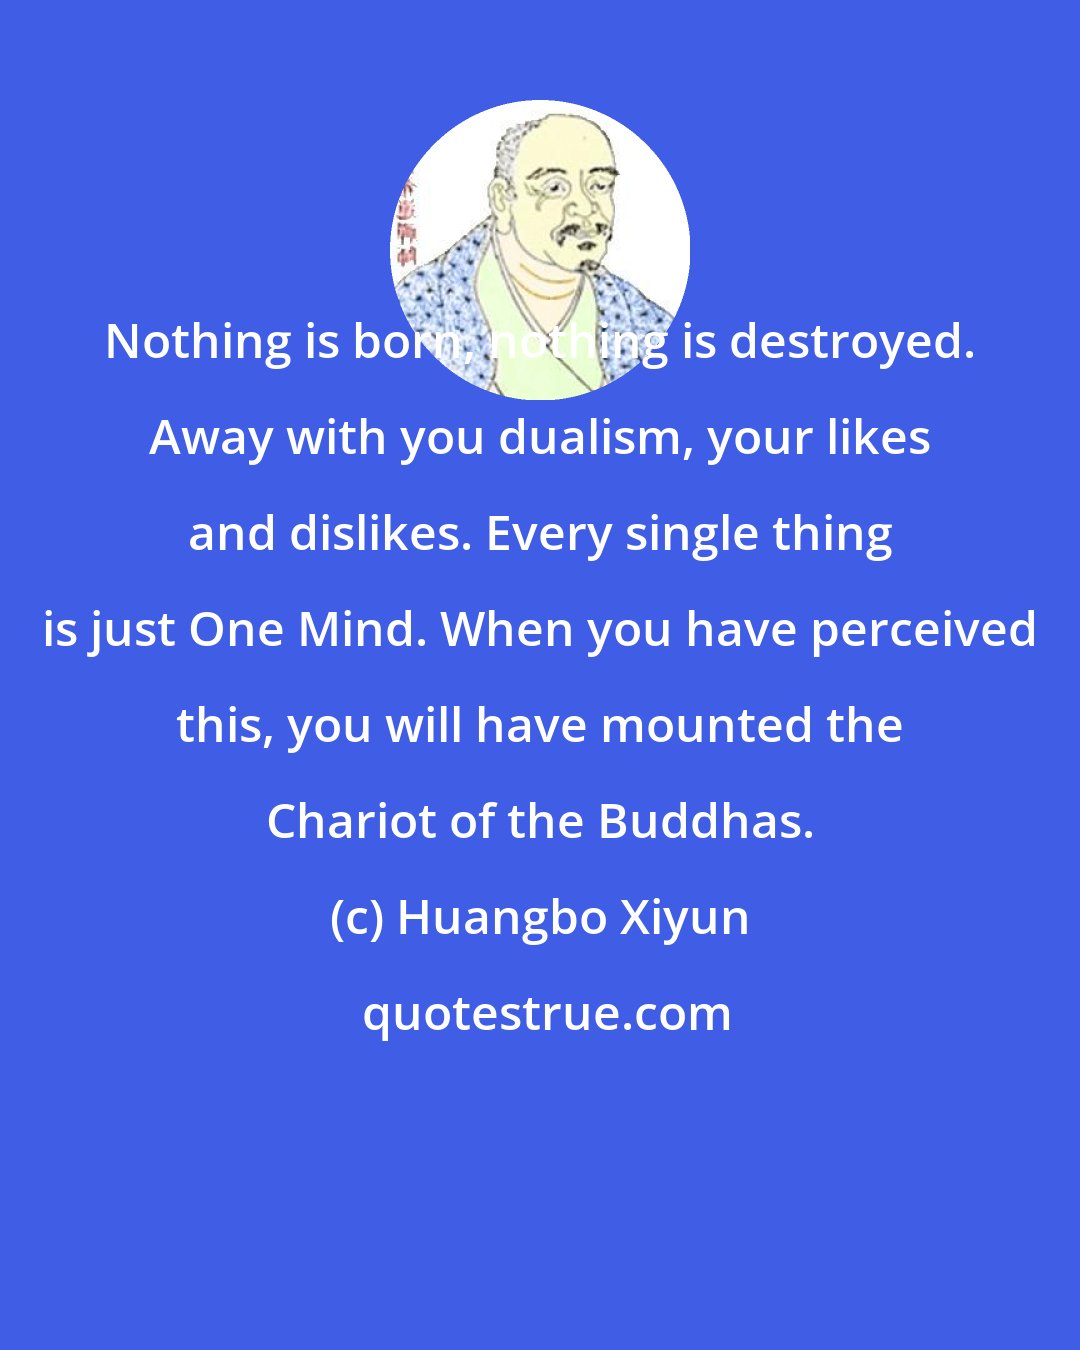 Huangbo Xiyun: Nothing is born, nothing is destroyed. Away with you dualism, your likes and dislikes. Every single thing is just One Mind. When you have perceived this, you will have mounted the Chariot of the Buddhas.